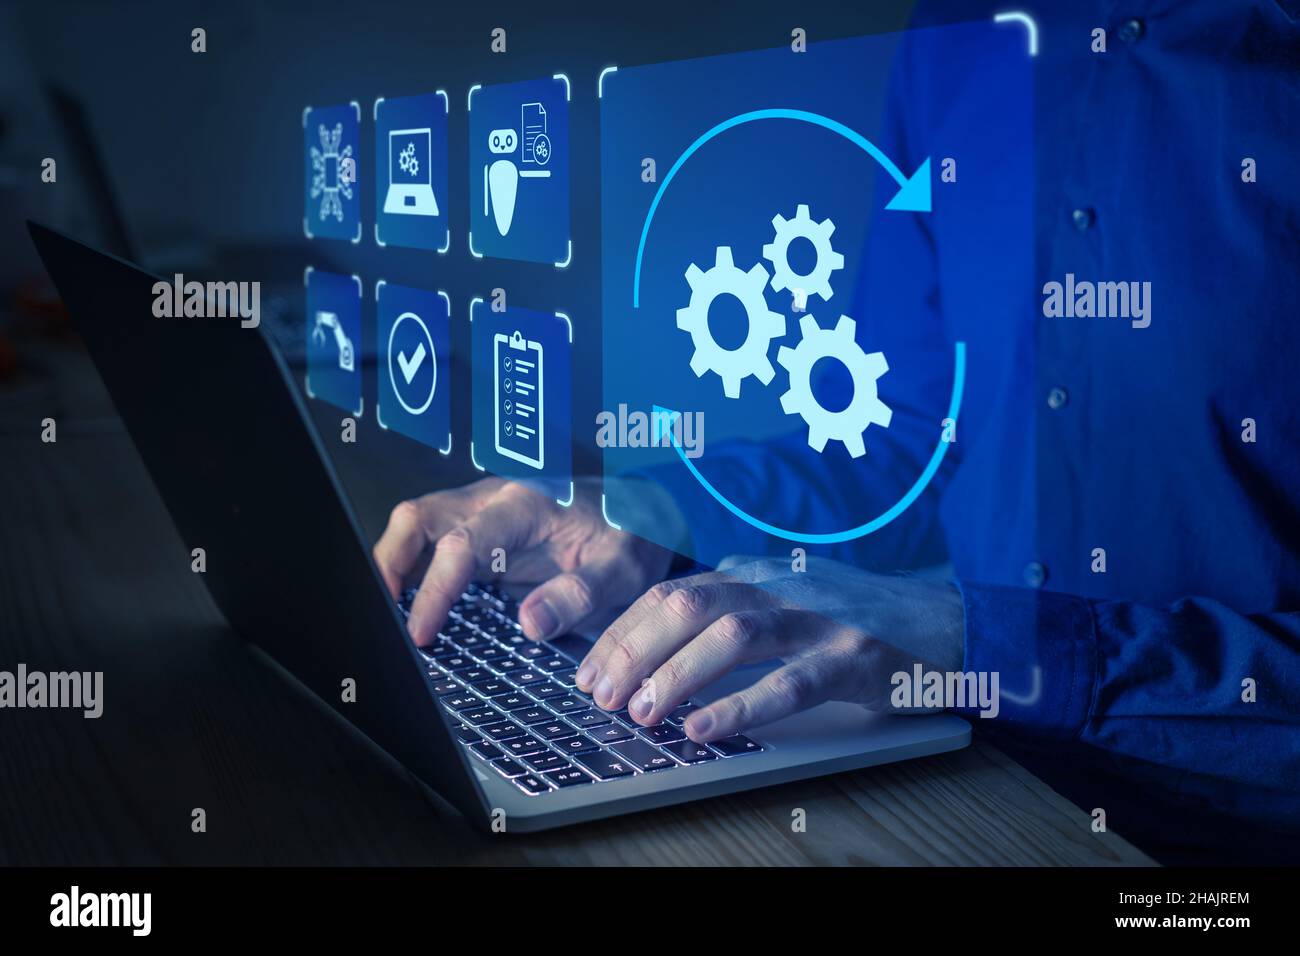 Robotic Process Automation (RPA) technology to automate business tasks with AI. Concept with expert setting up automated software on laptop computer. Stock Photo